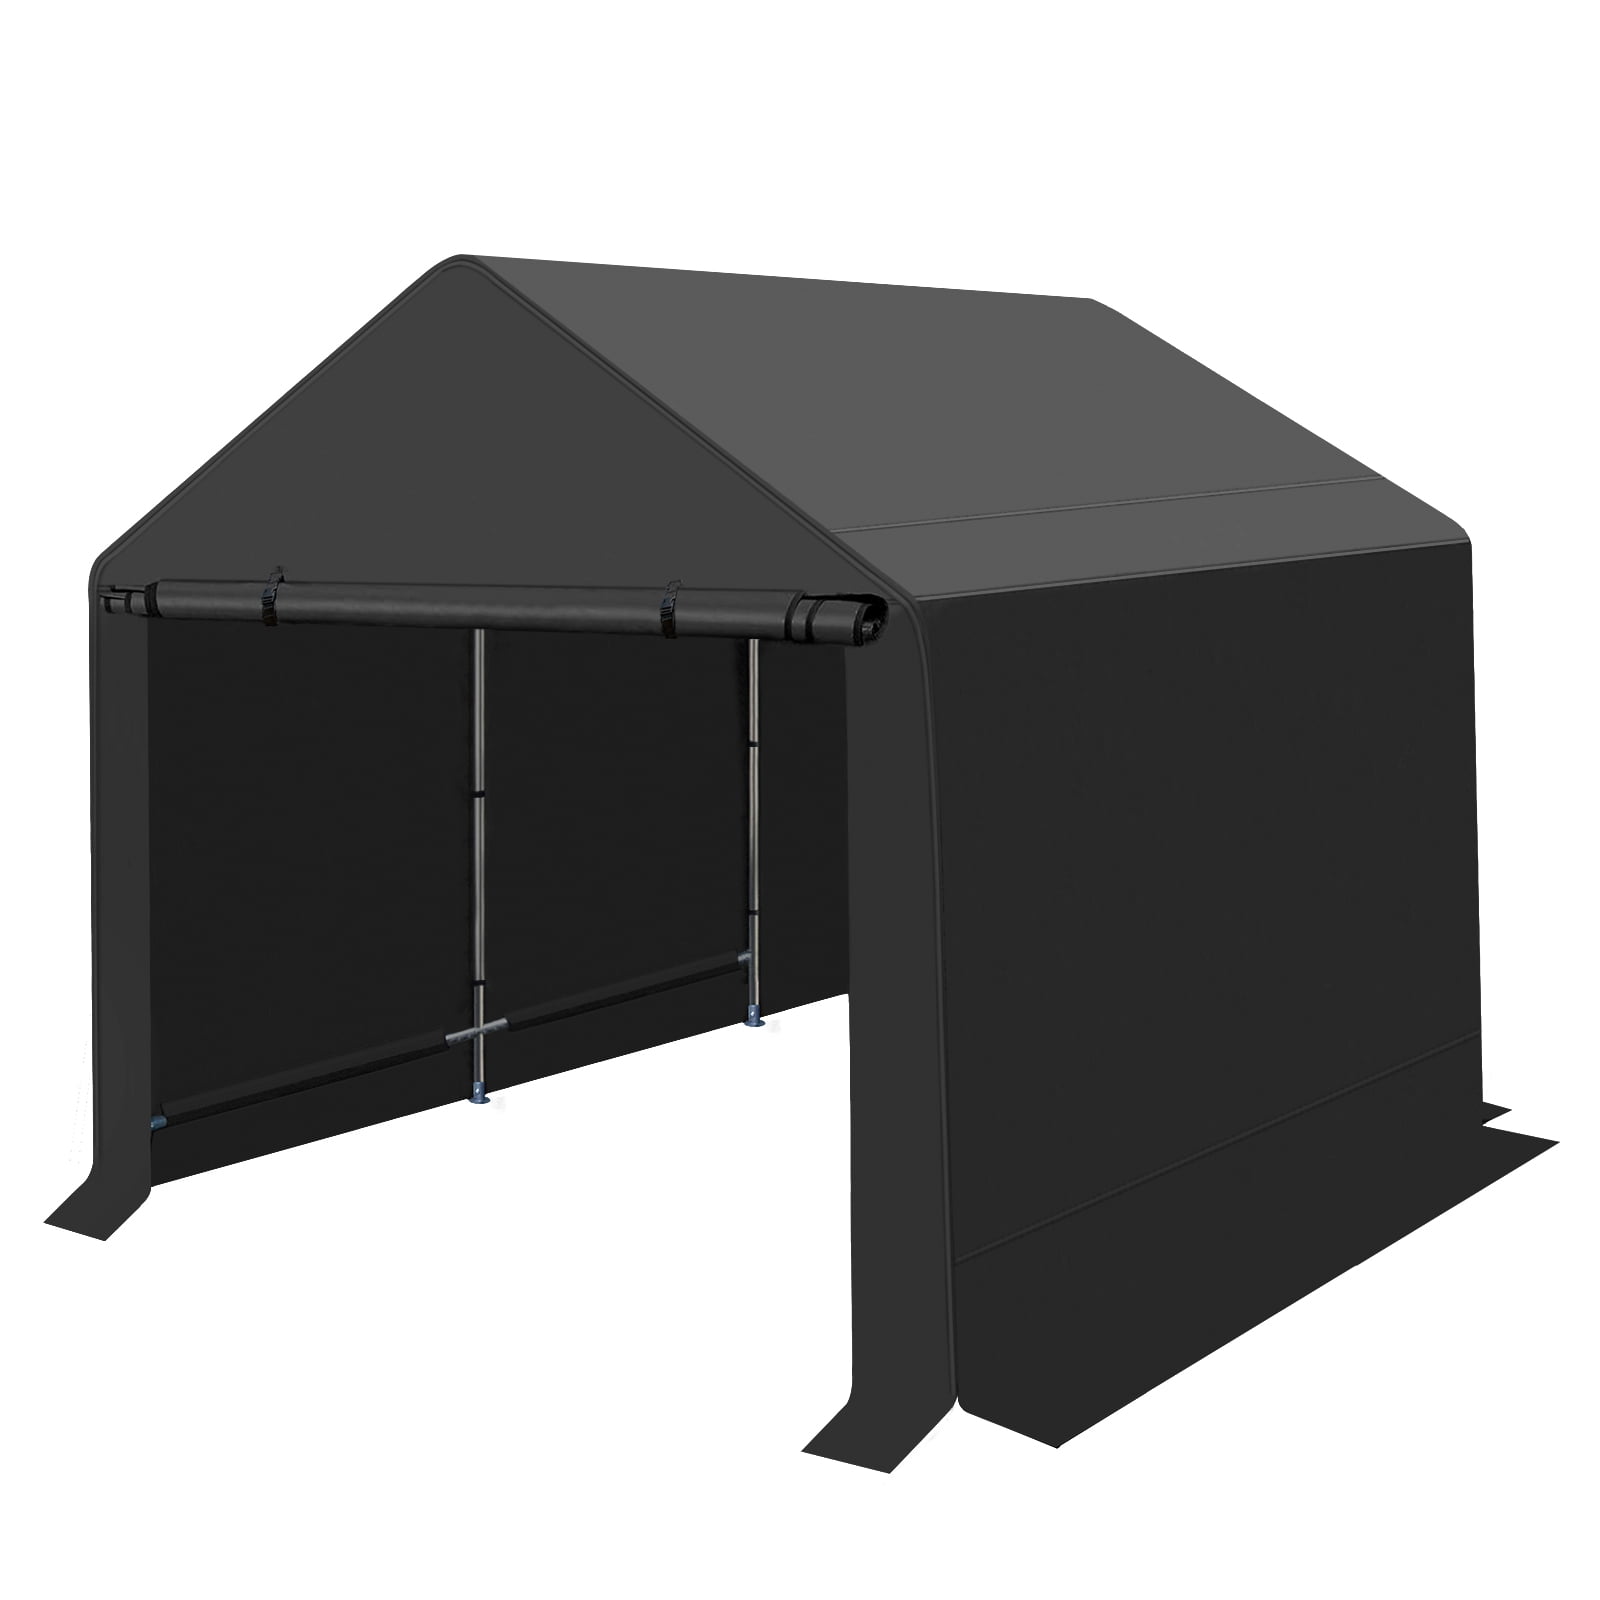 Outdoor Canopy Storage Shed, 10x10 ft All-season Shelter Logic Portable ...